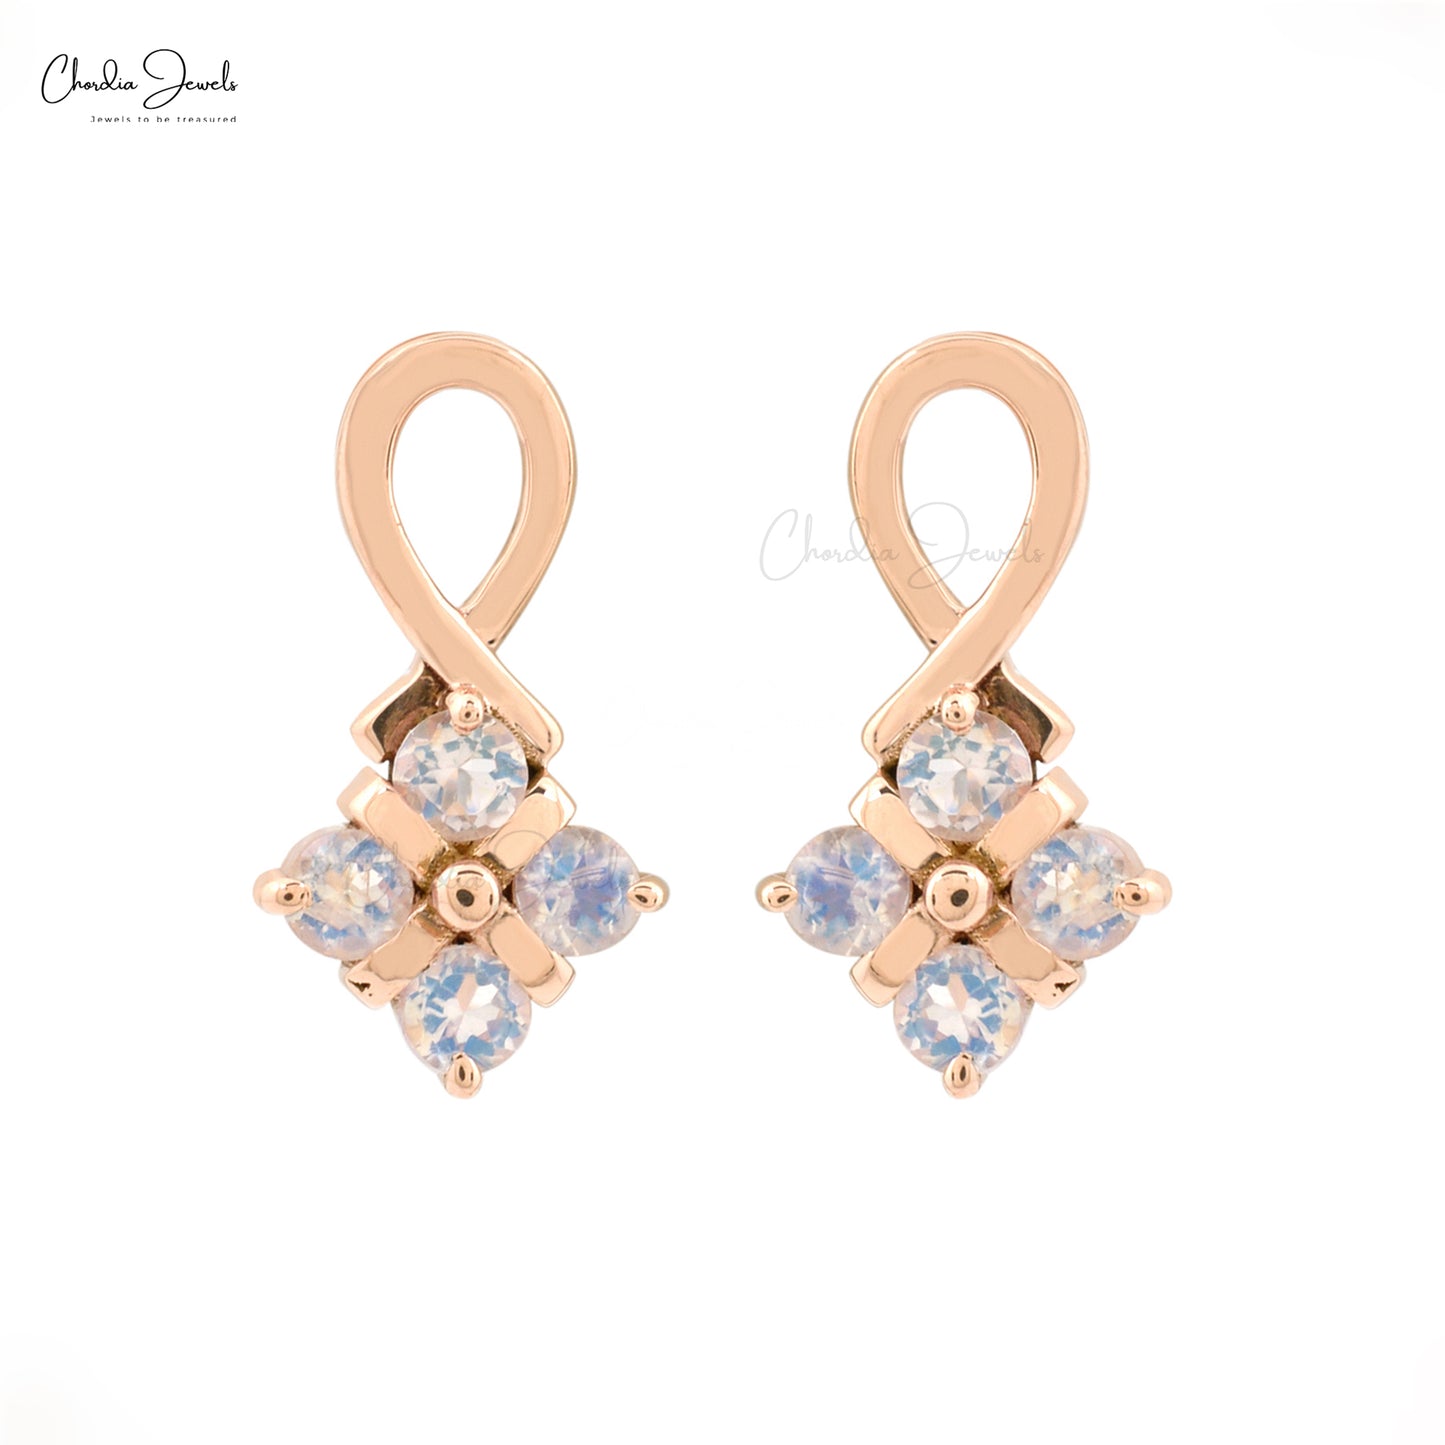 Load image into Gallery viewer, Natural Rainbow Moonstone Cluster Earrings 2mm Round Cut Gemstone 14k Solid Rose Gold Dainty Earrings For Her
